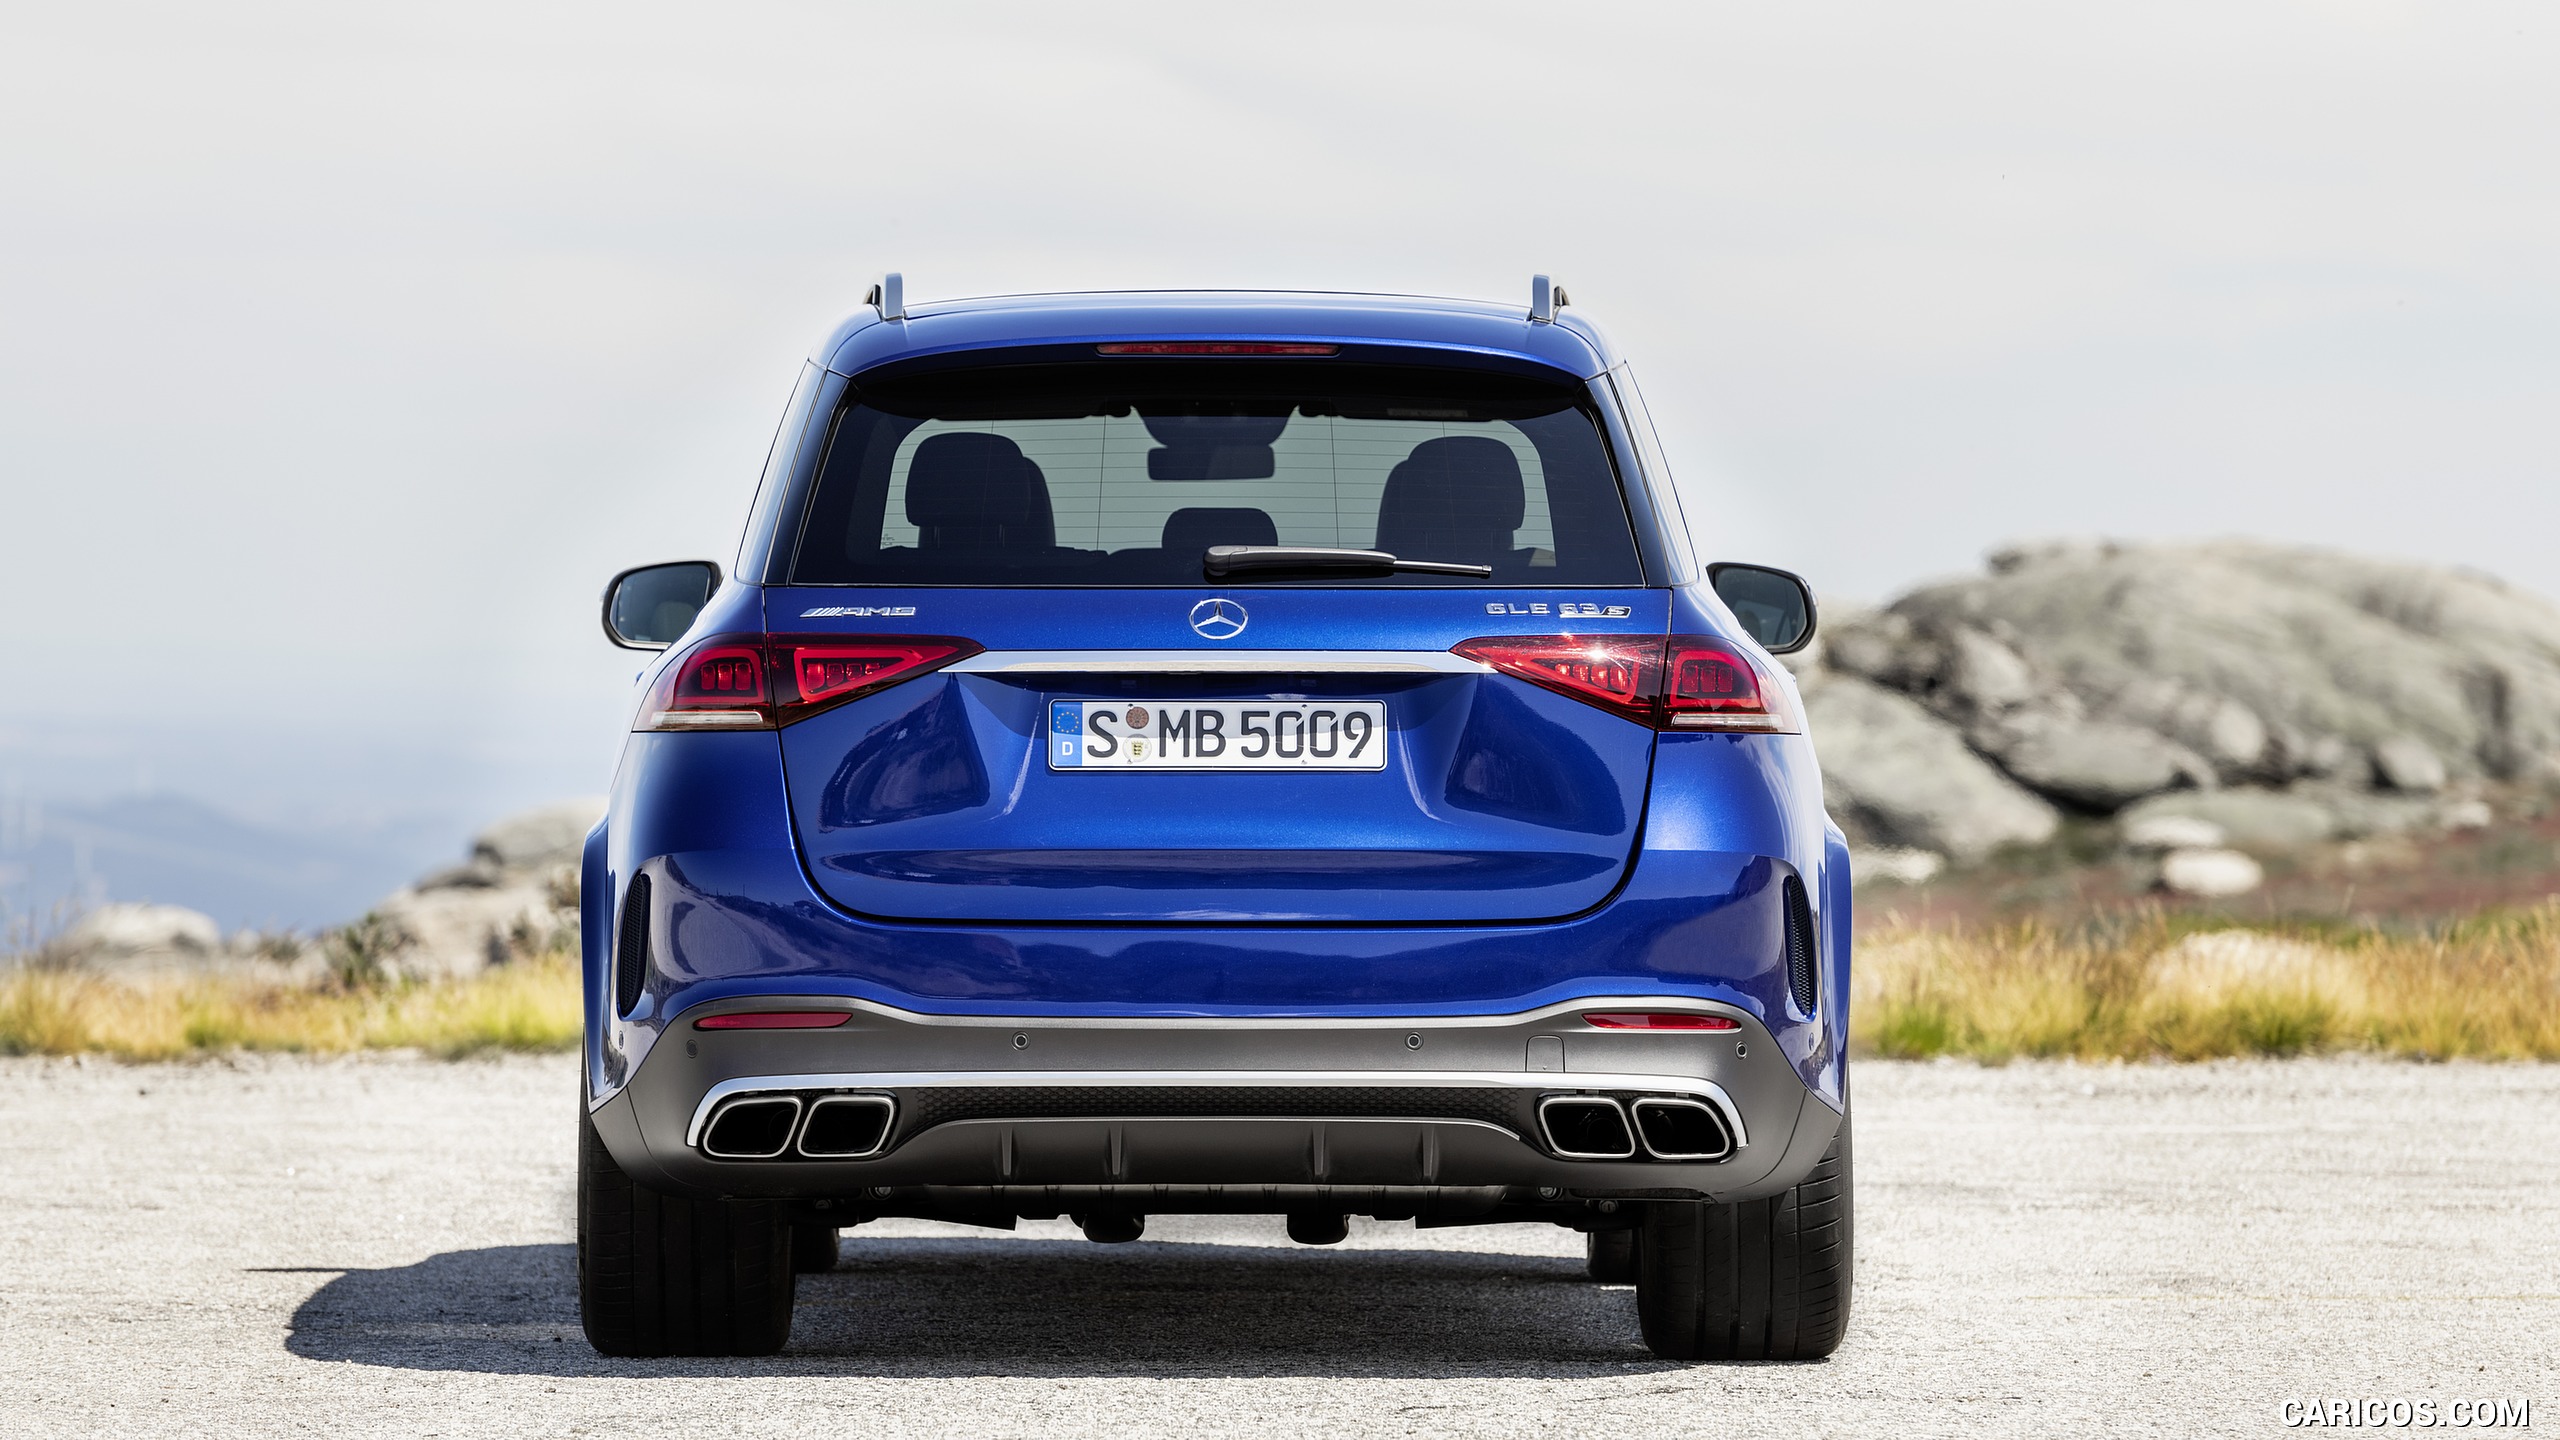 2021 Mercedes-AMG GLE 63 S 4MATIC - Rear, #16 of 187